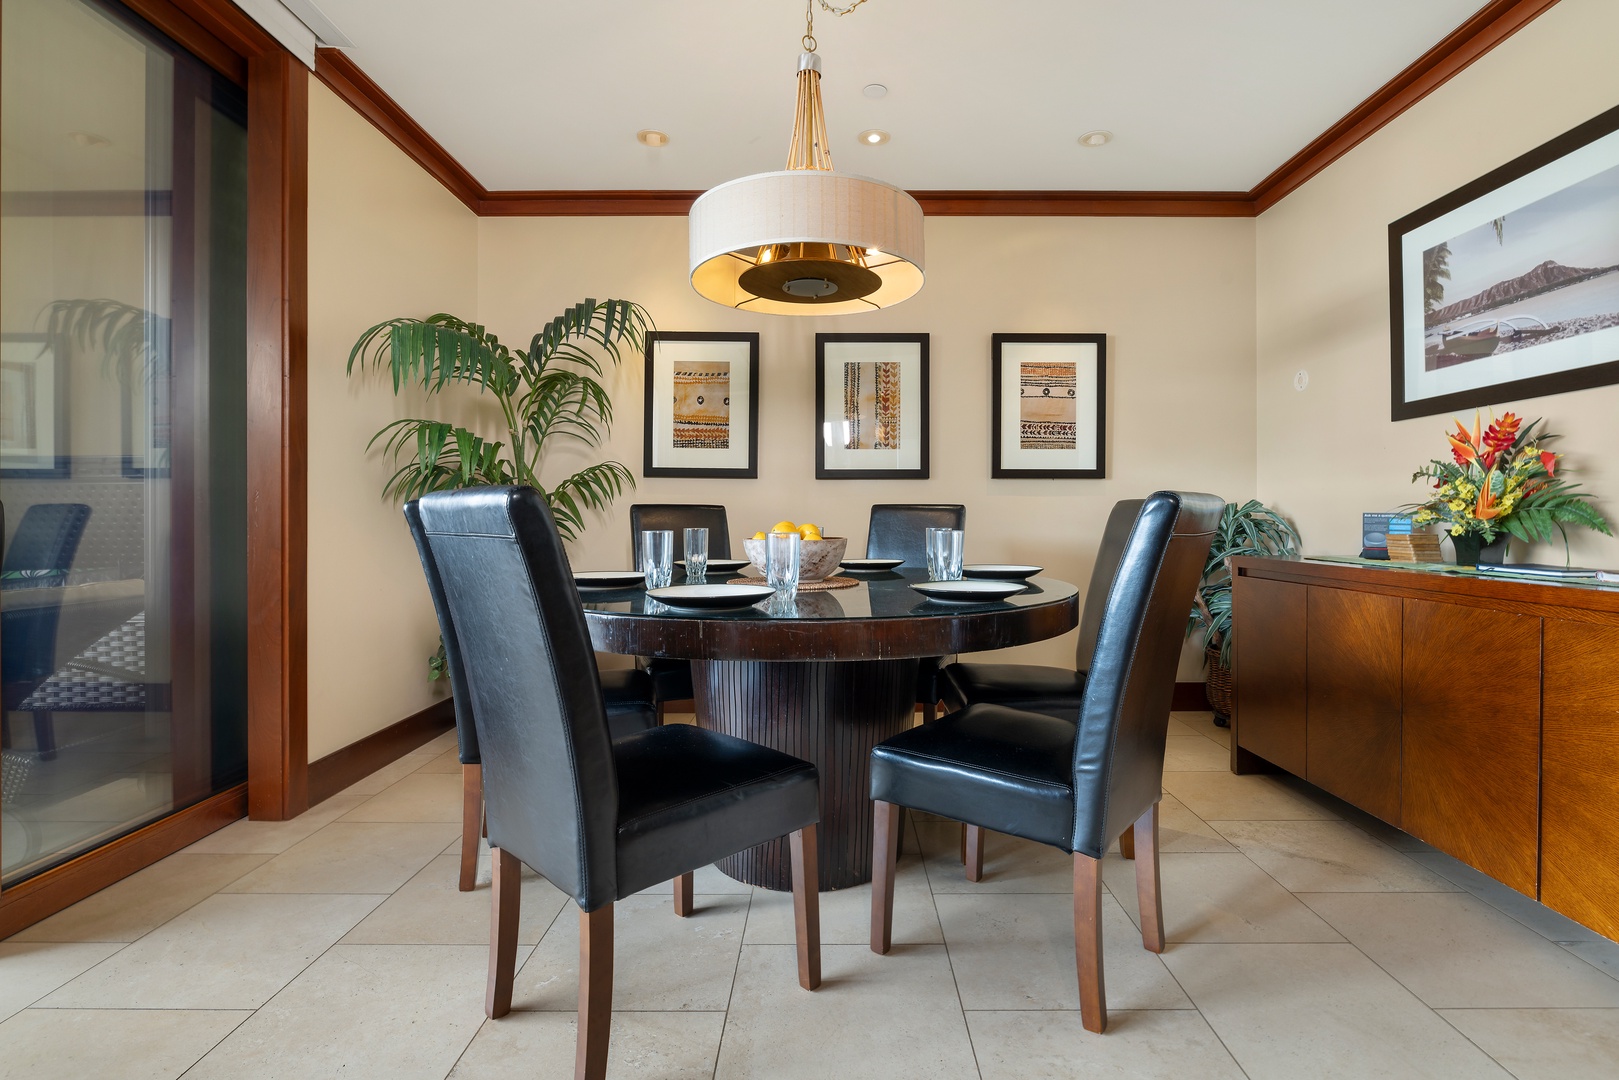 Kapolei Vacation Rentals, Ko Olina Beach Villas O1105 - Dining space seats six and provides connection to both kitchen and living area.